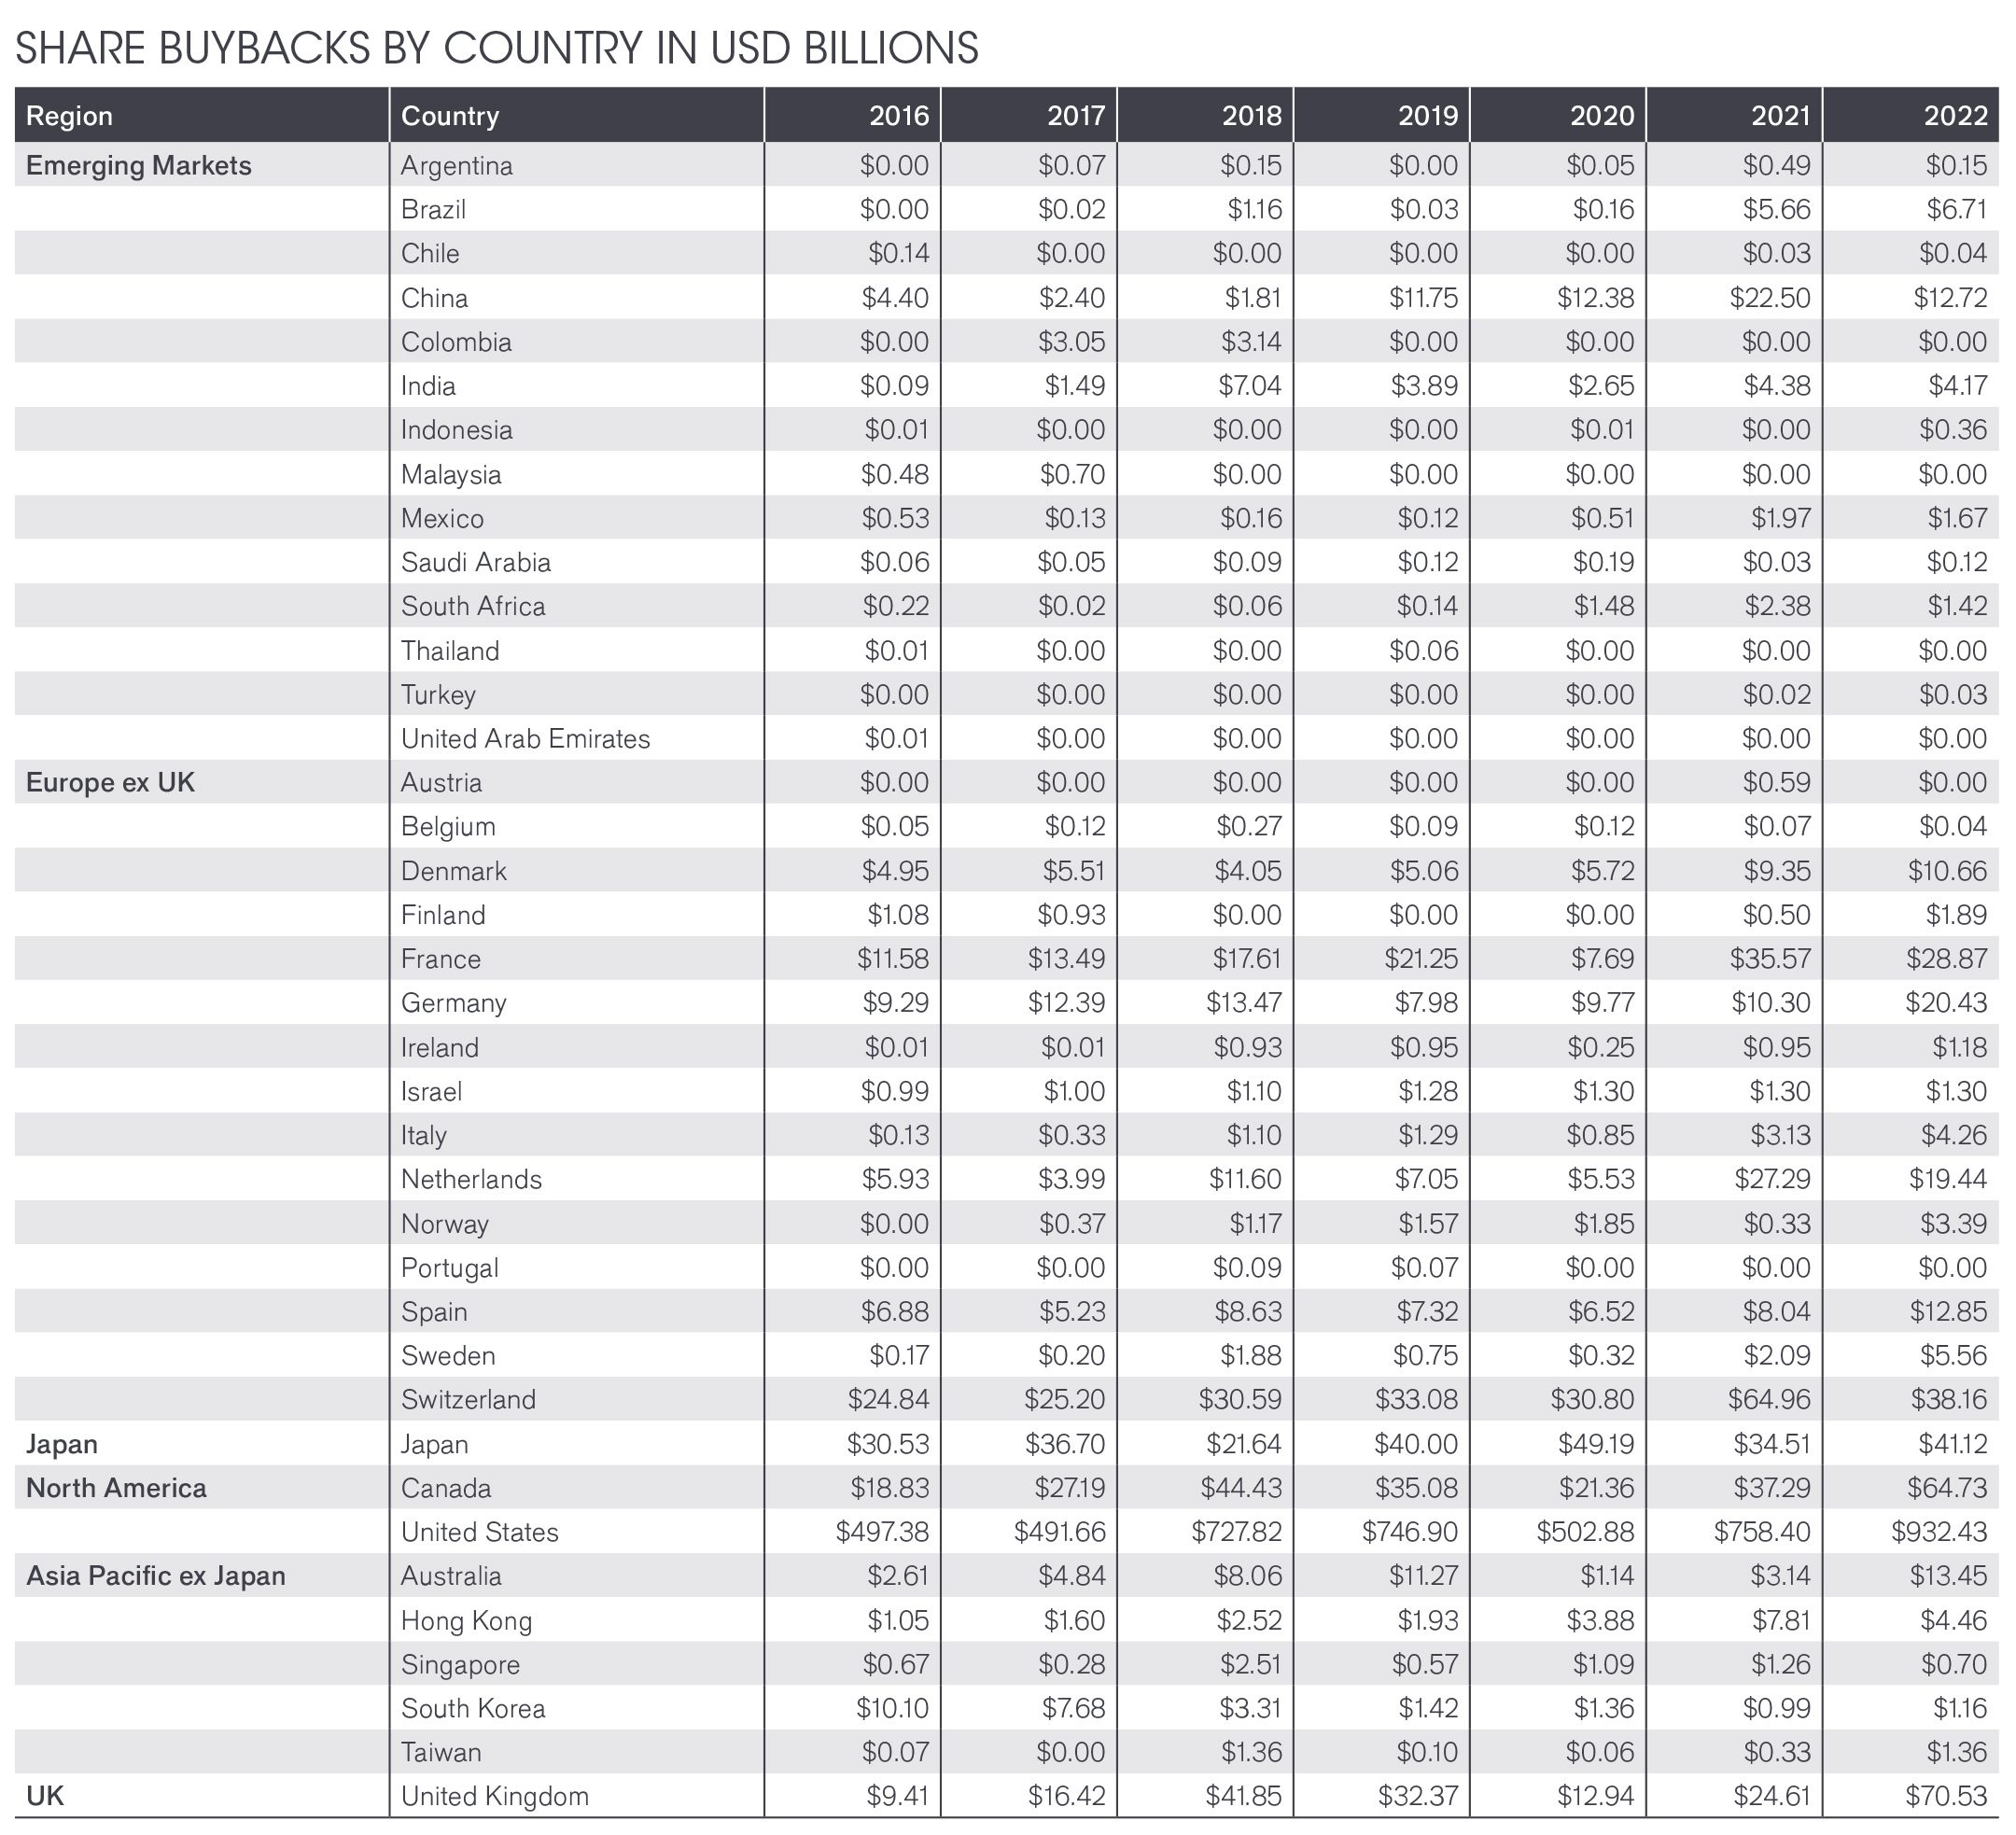 share buybacks by country in USD billions